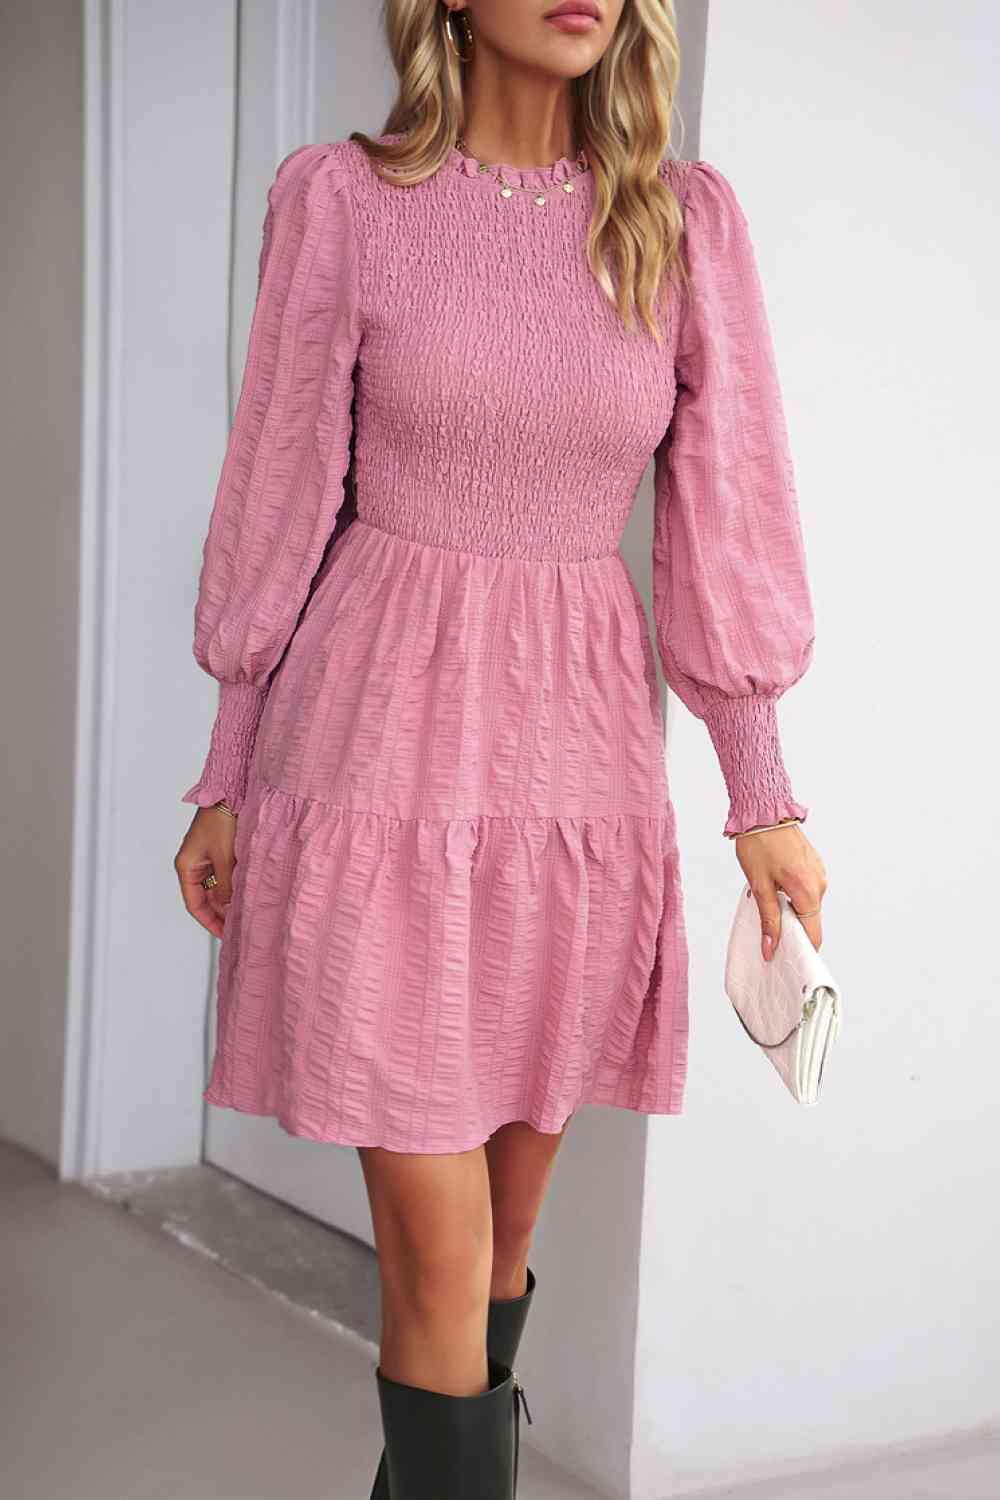 a woman wearing a pink dress and cowboy boots